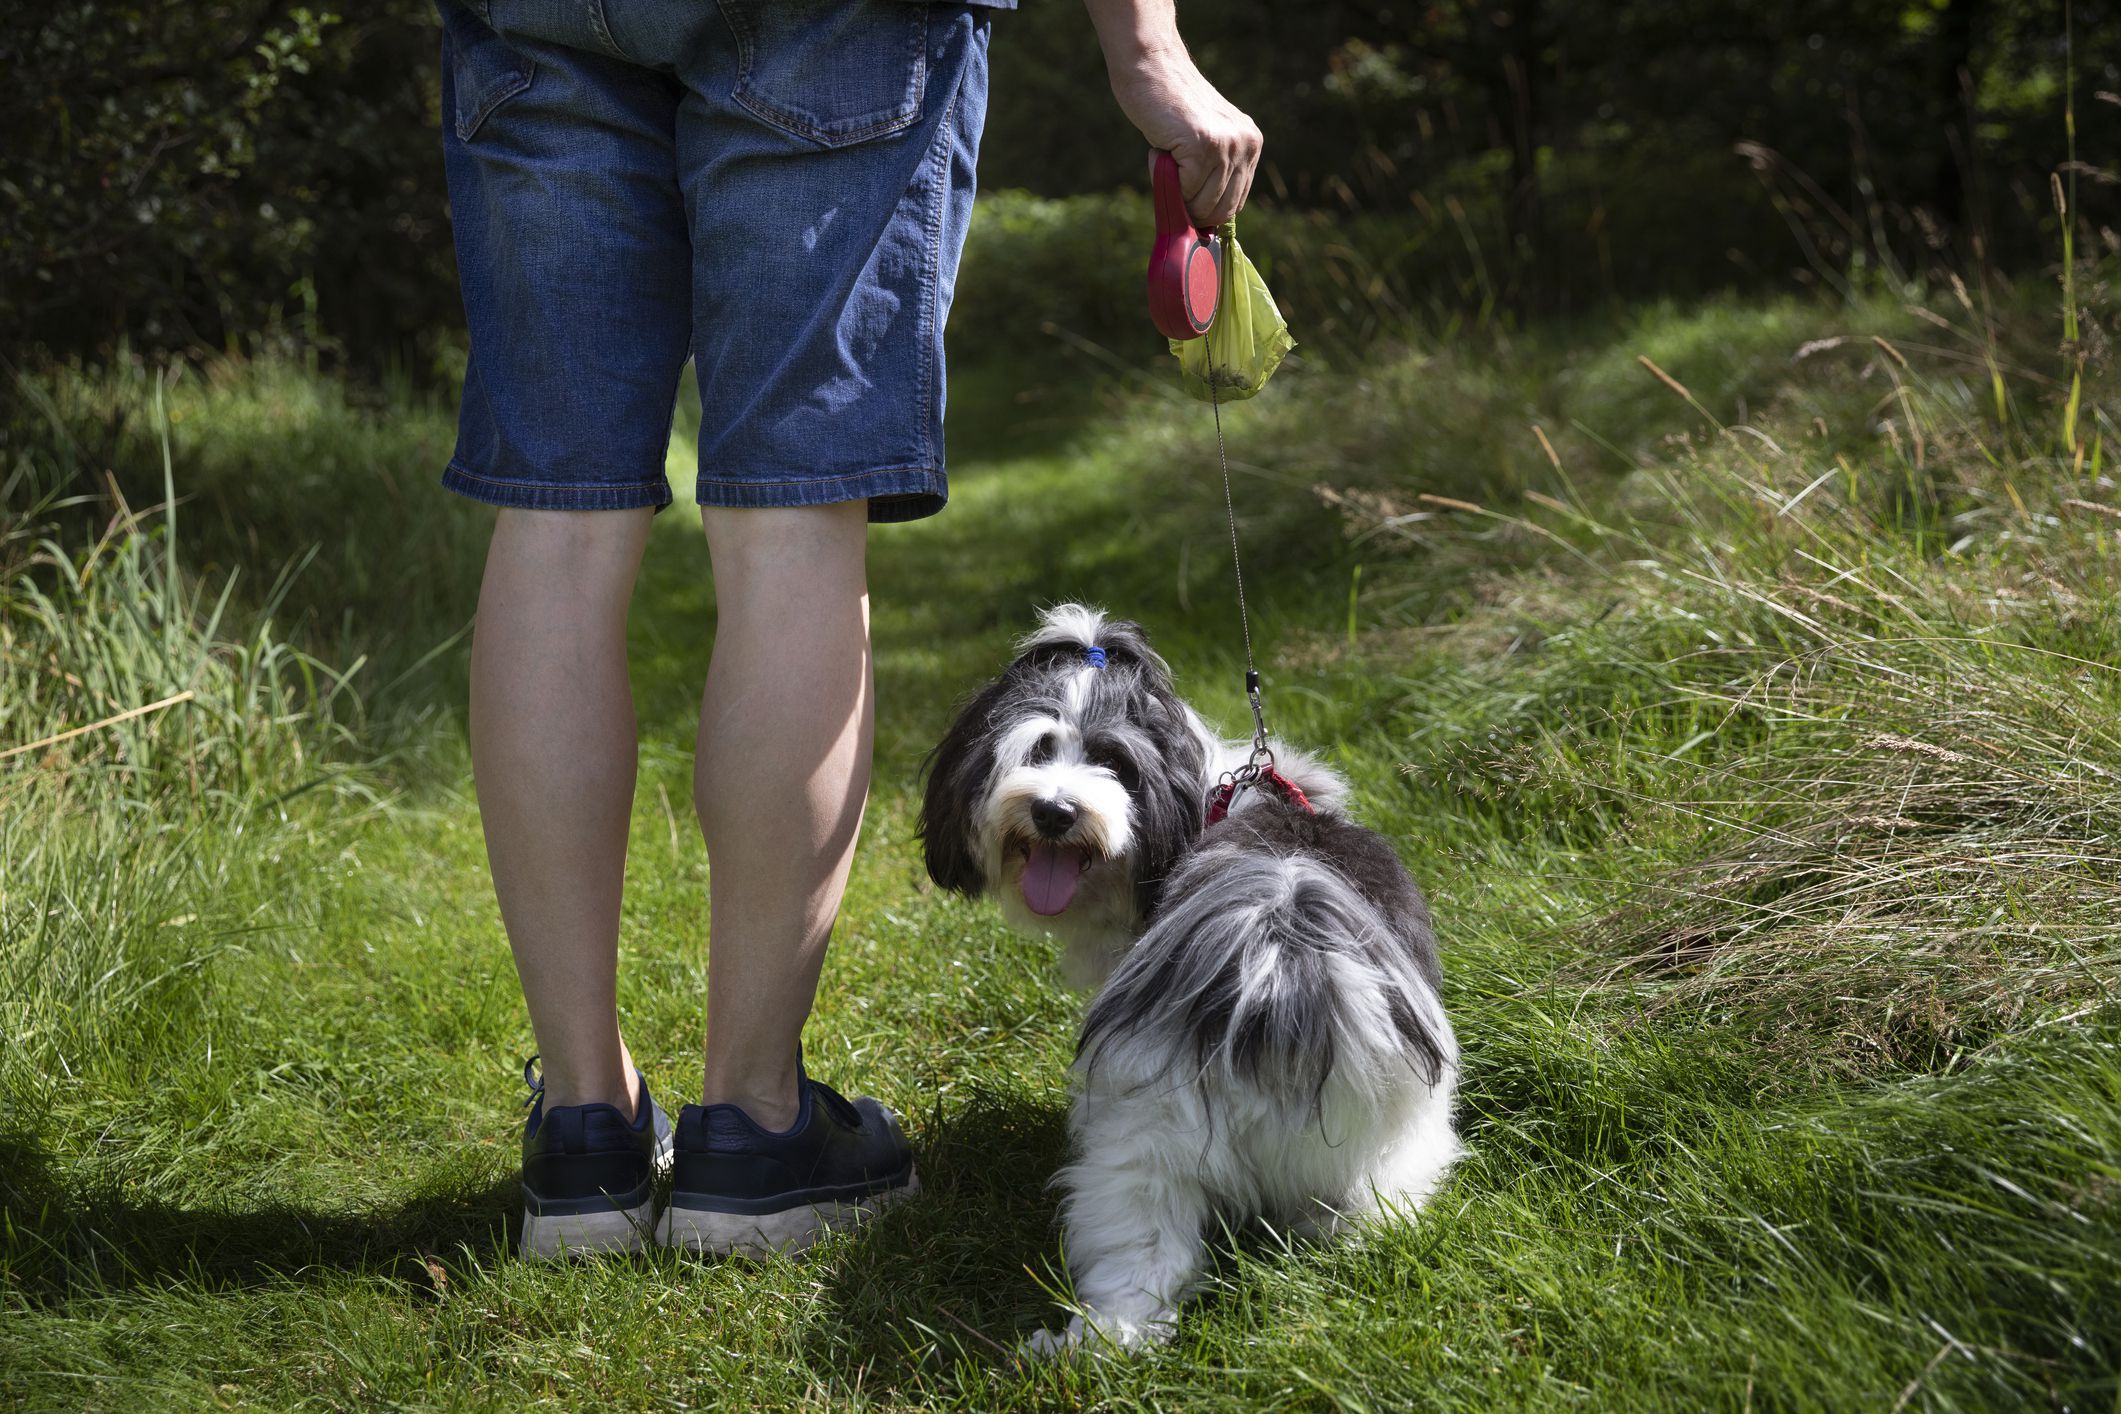 Is leaving dog poop bad for the environment?